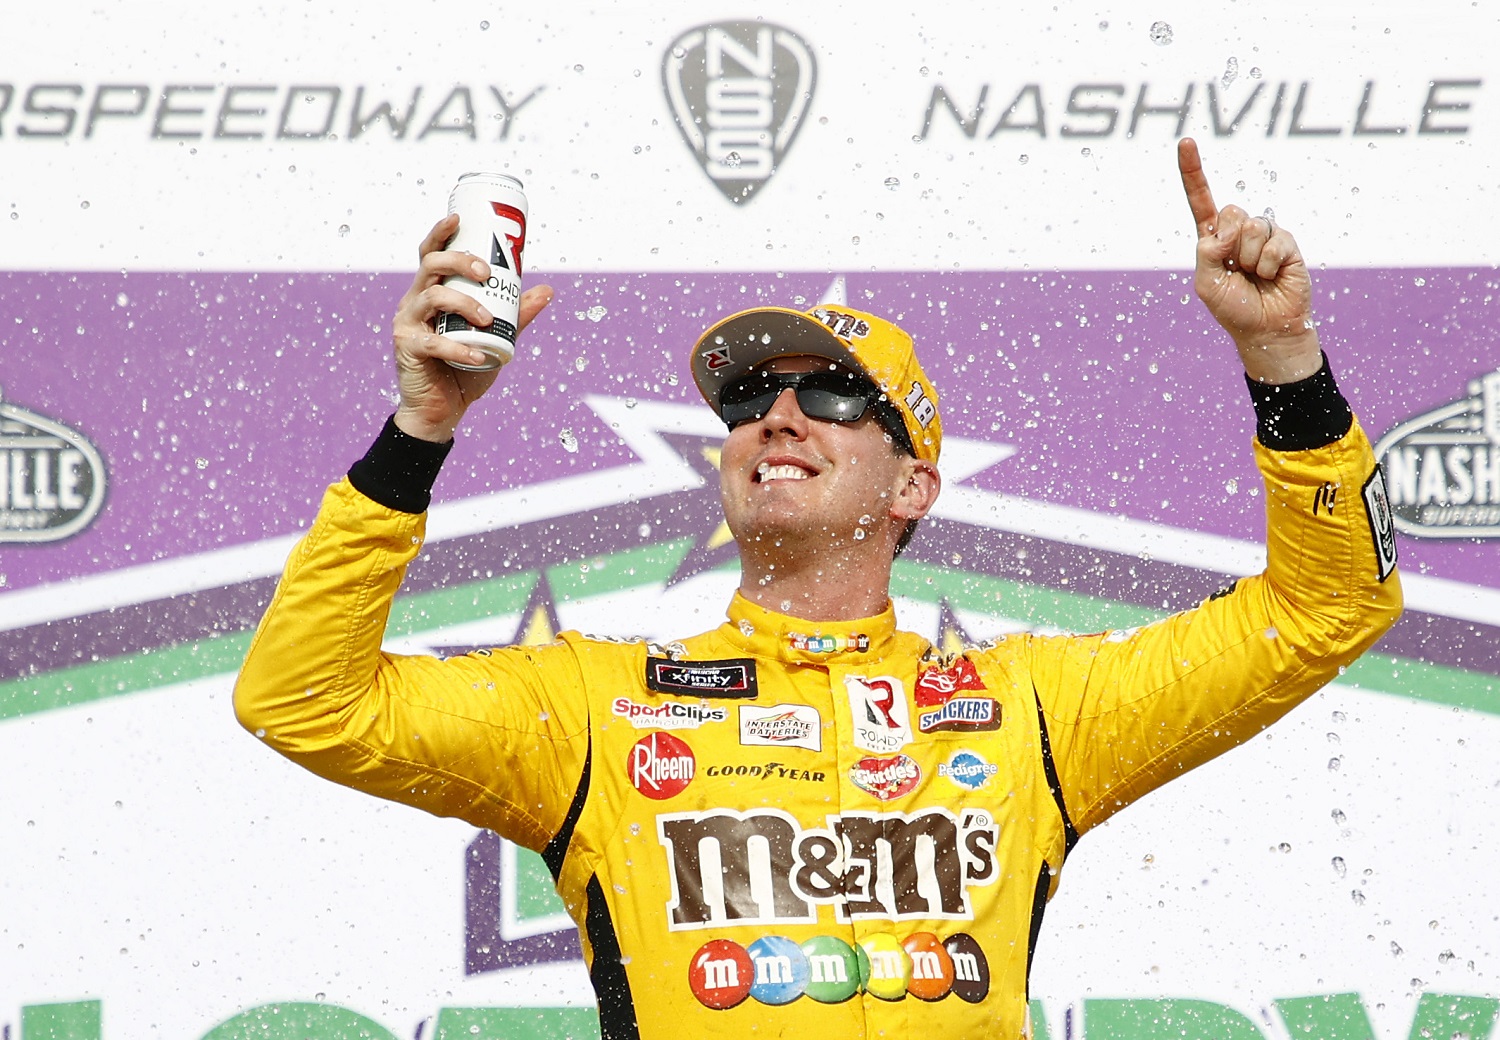 Kyle Busch is one of just three drivers to have captured 100 victories in one of NASCAR's three national series. | Jared C. Tilton/Getty Images